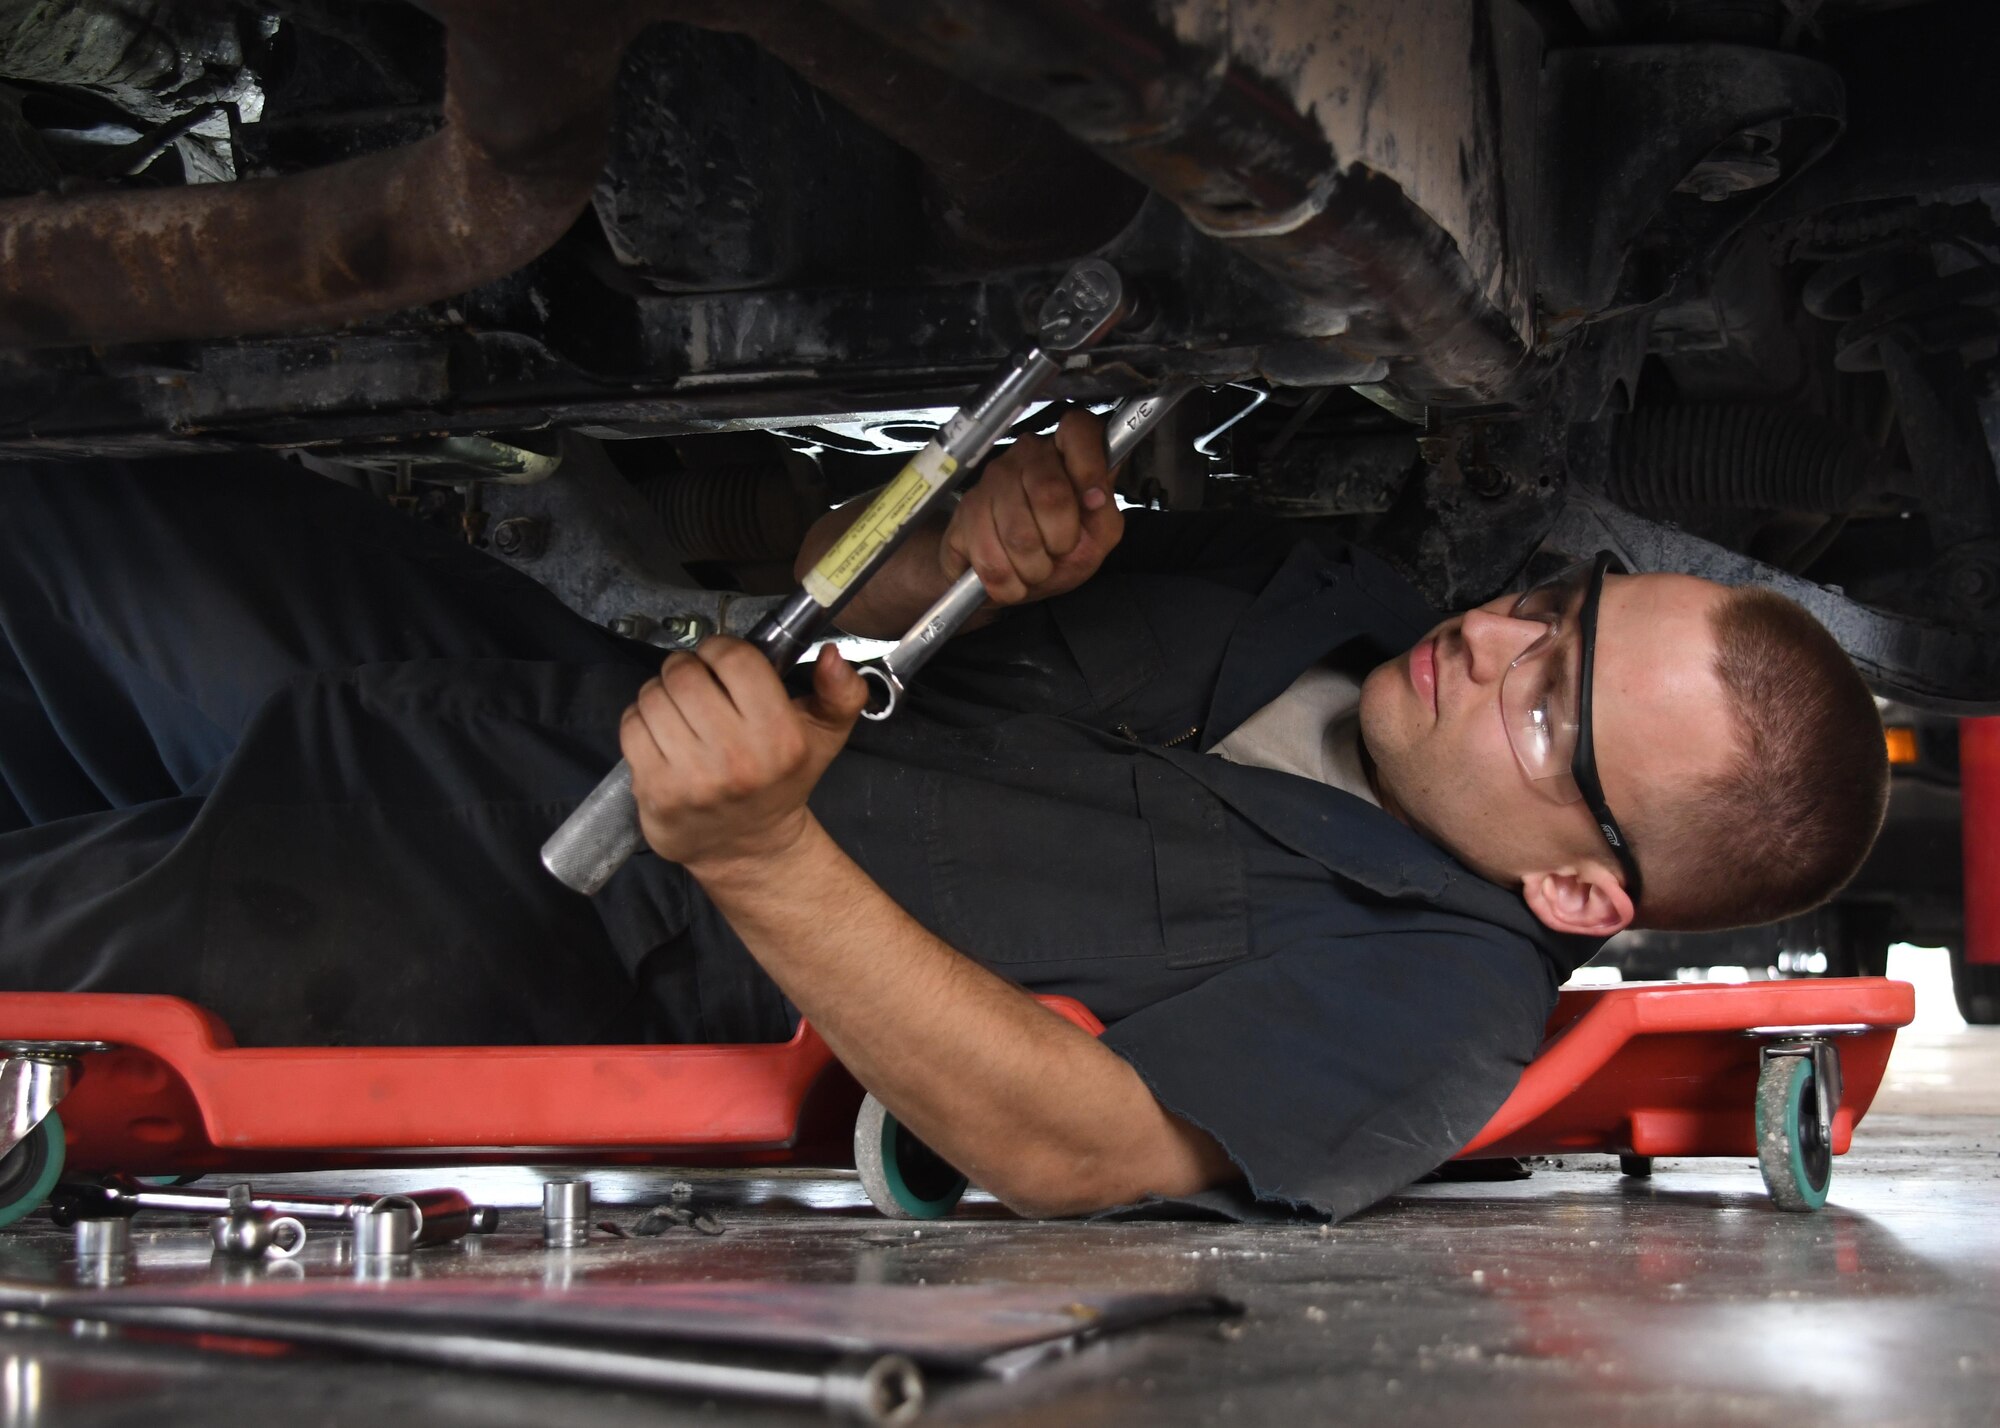 U.S. Air Force Senior Airman Nicholas Ramey, a light maintenance shop mechanic with the 379th Expeditionary Logistics Readiness Squadron Vehicle Management Flight, reattaches the exhaust pipe on a vehicle at Al Udeid Air Base, Qatar, March 11, 2017. When lease and government vehicles break down at Al Udeid, the Airmen of the vehicle management flight are responsible for troubleshooting and repairing them. (U.S. Air Force photo by Senior Airman Miles Wilson)